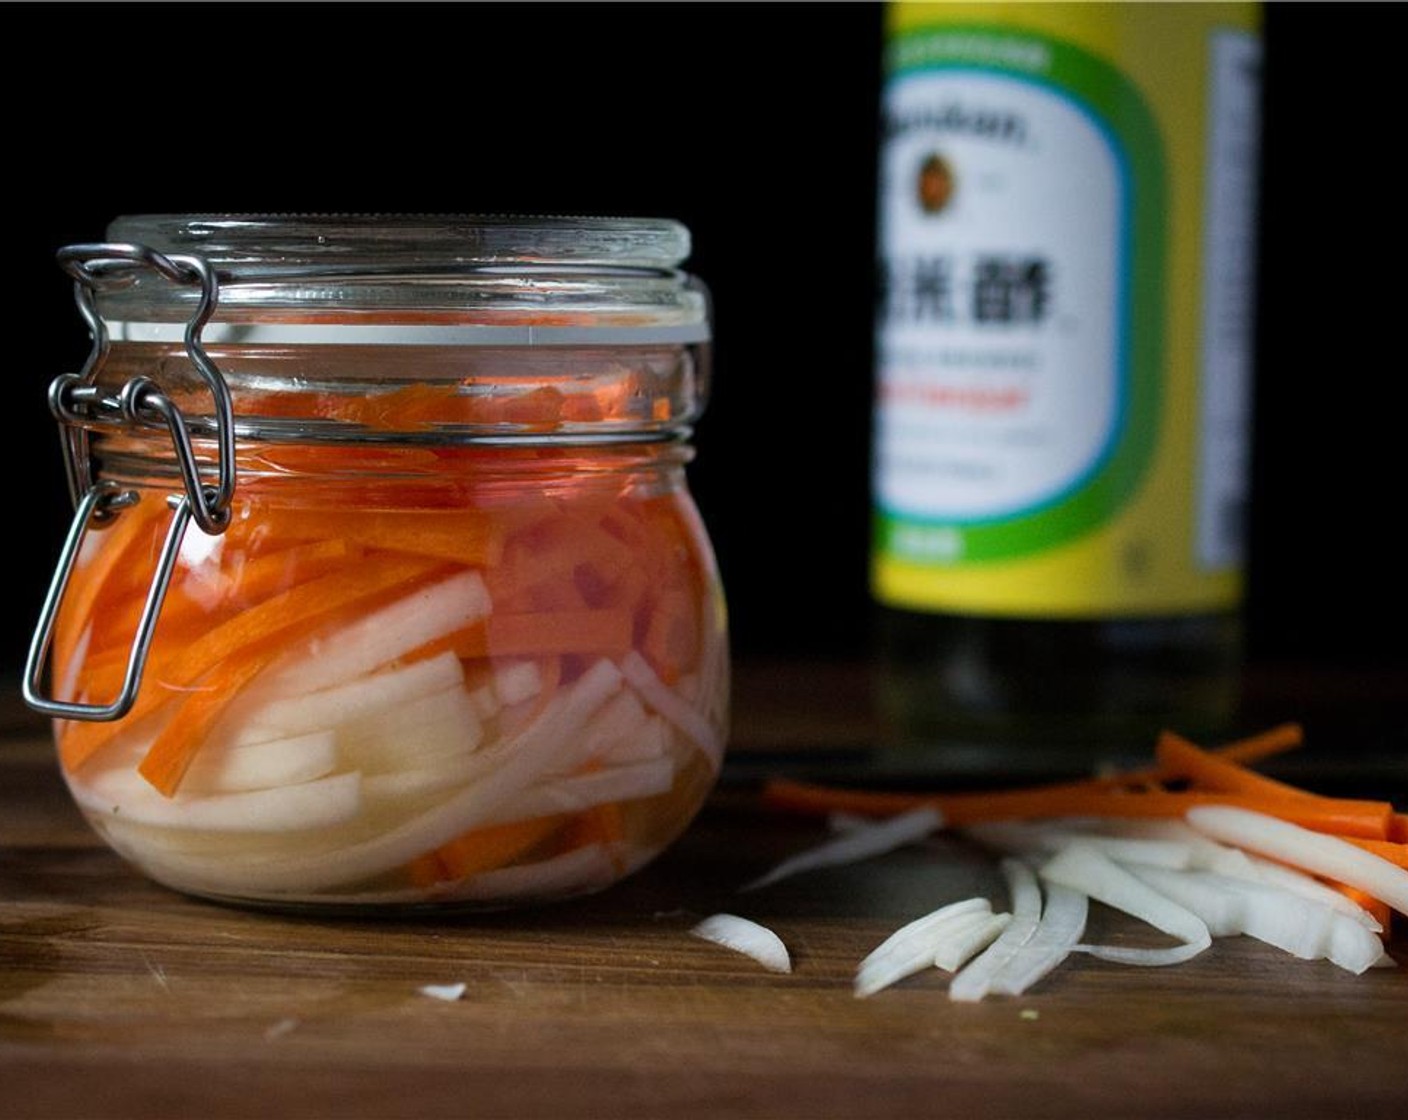 step 1 Prepare the Do Chua: In a sterile jar, combine the Rice Vinegar (1 1/4 cups), Salt (1 tsp), Granulated Sugar (1/2 Tbsp) and stir well. Add the Carrots (2) and Daikon Radish (1). Refrigerate until needed.